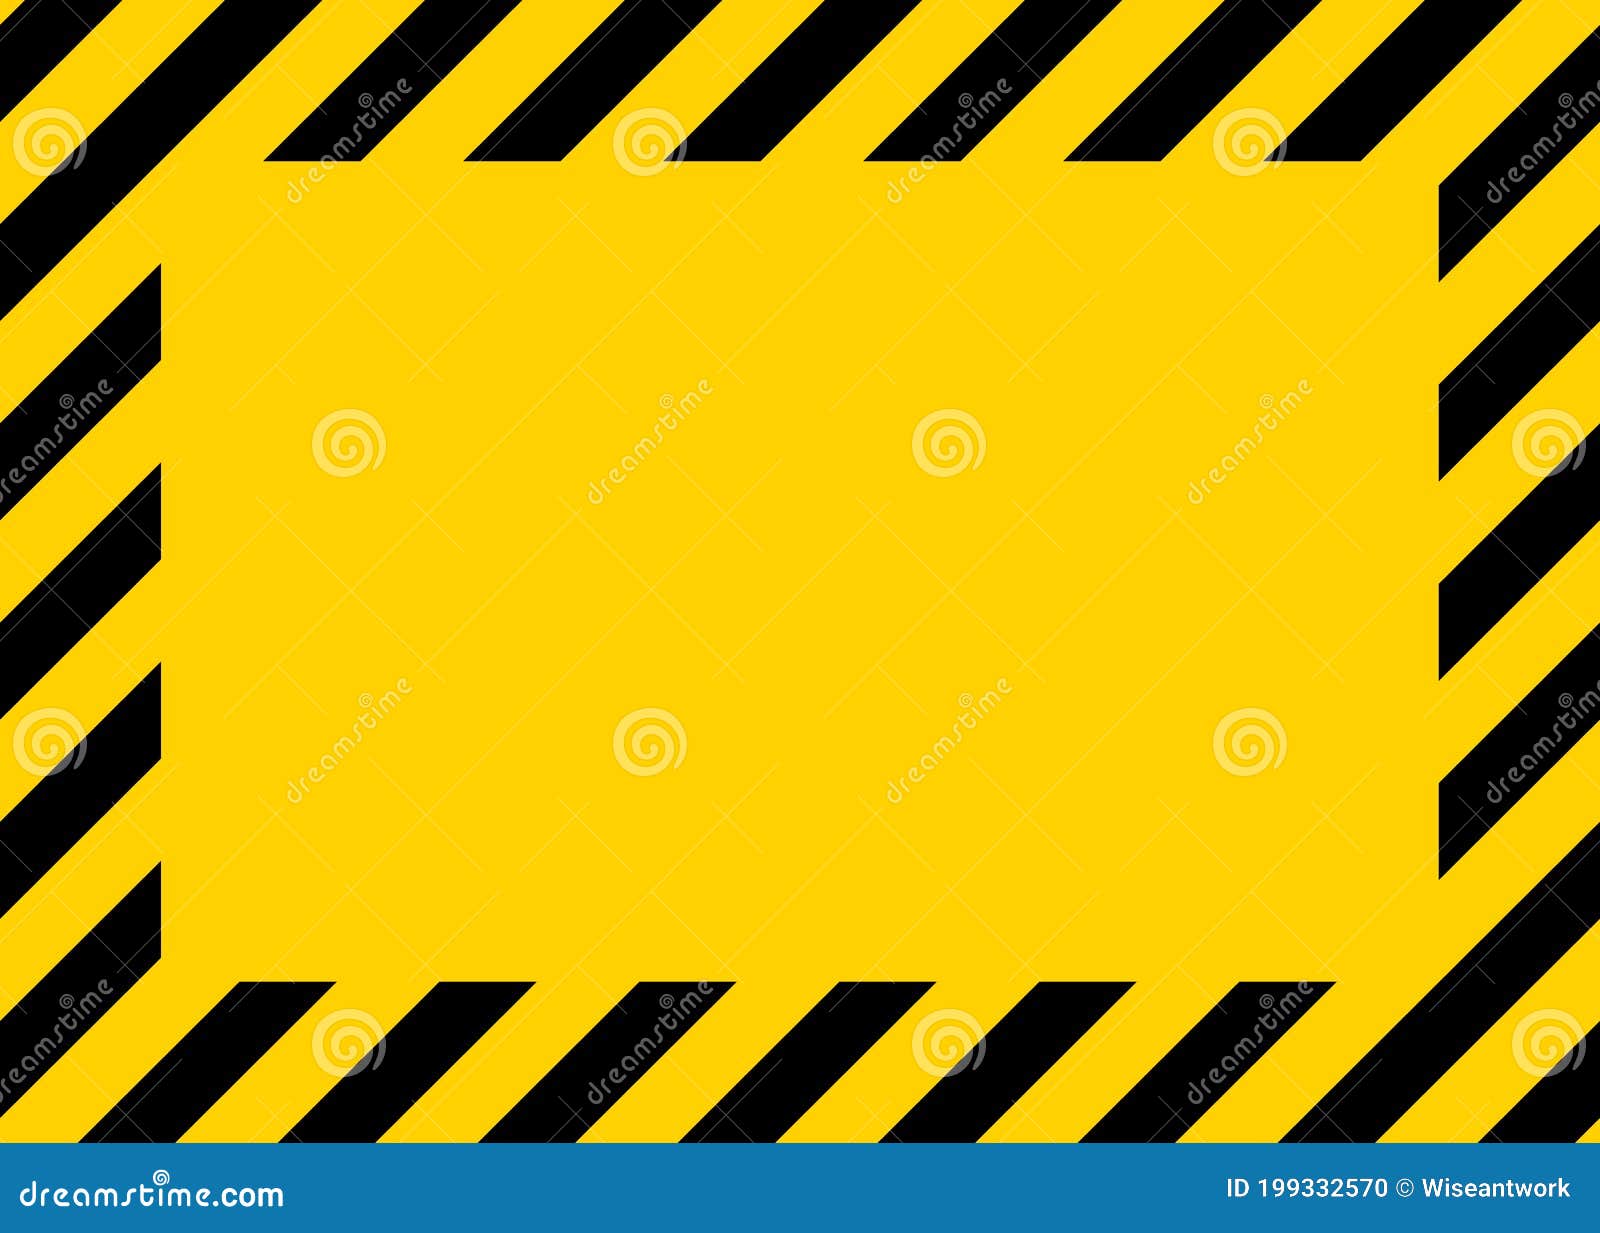 caution, warning in yellow-black border. warning tape of danger on construction area. sign of hazard. frame-background for safety